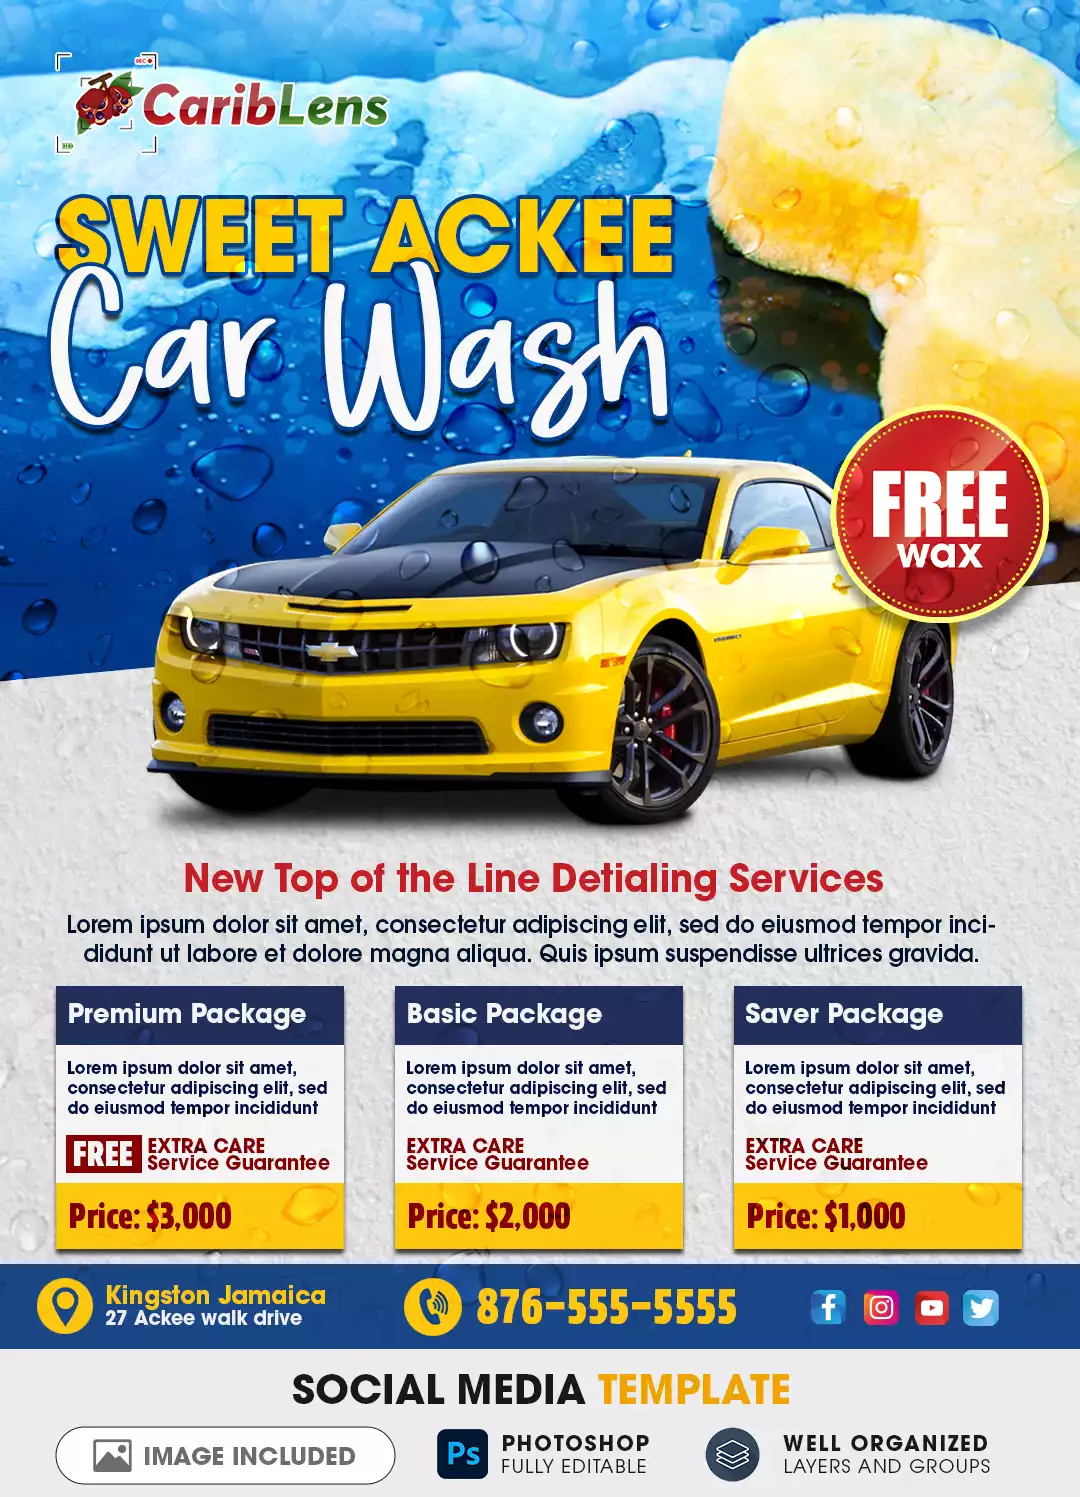 Mobile Car Wash And Detailing Services Flyer Free Psd Template Download Copy 2